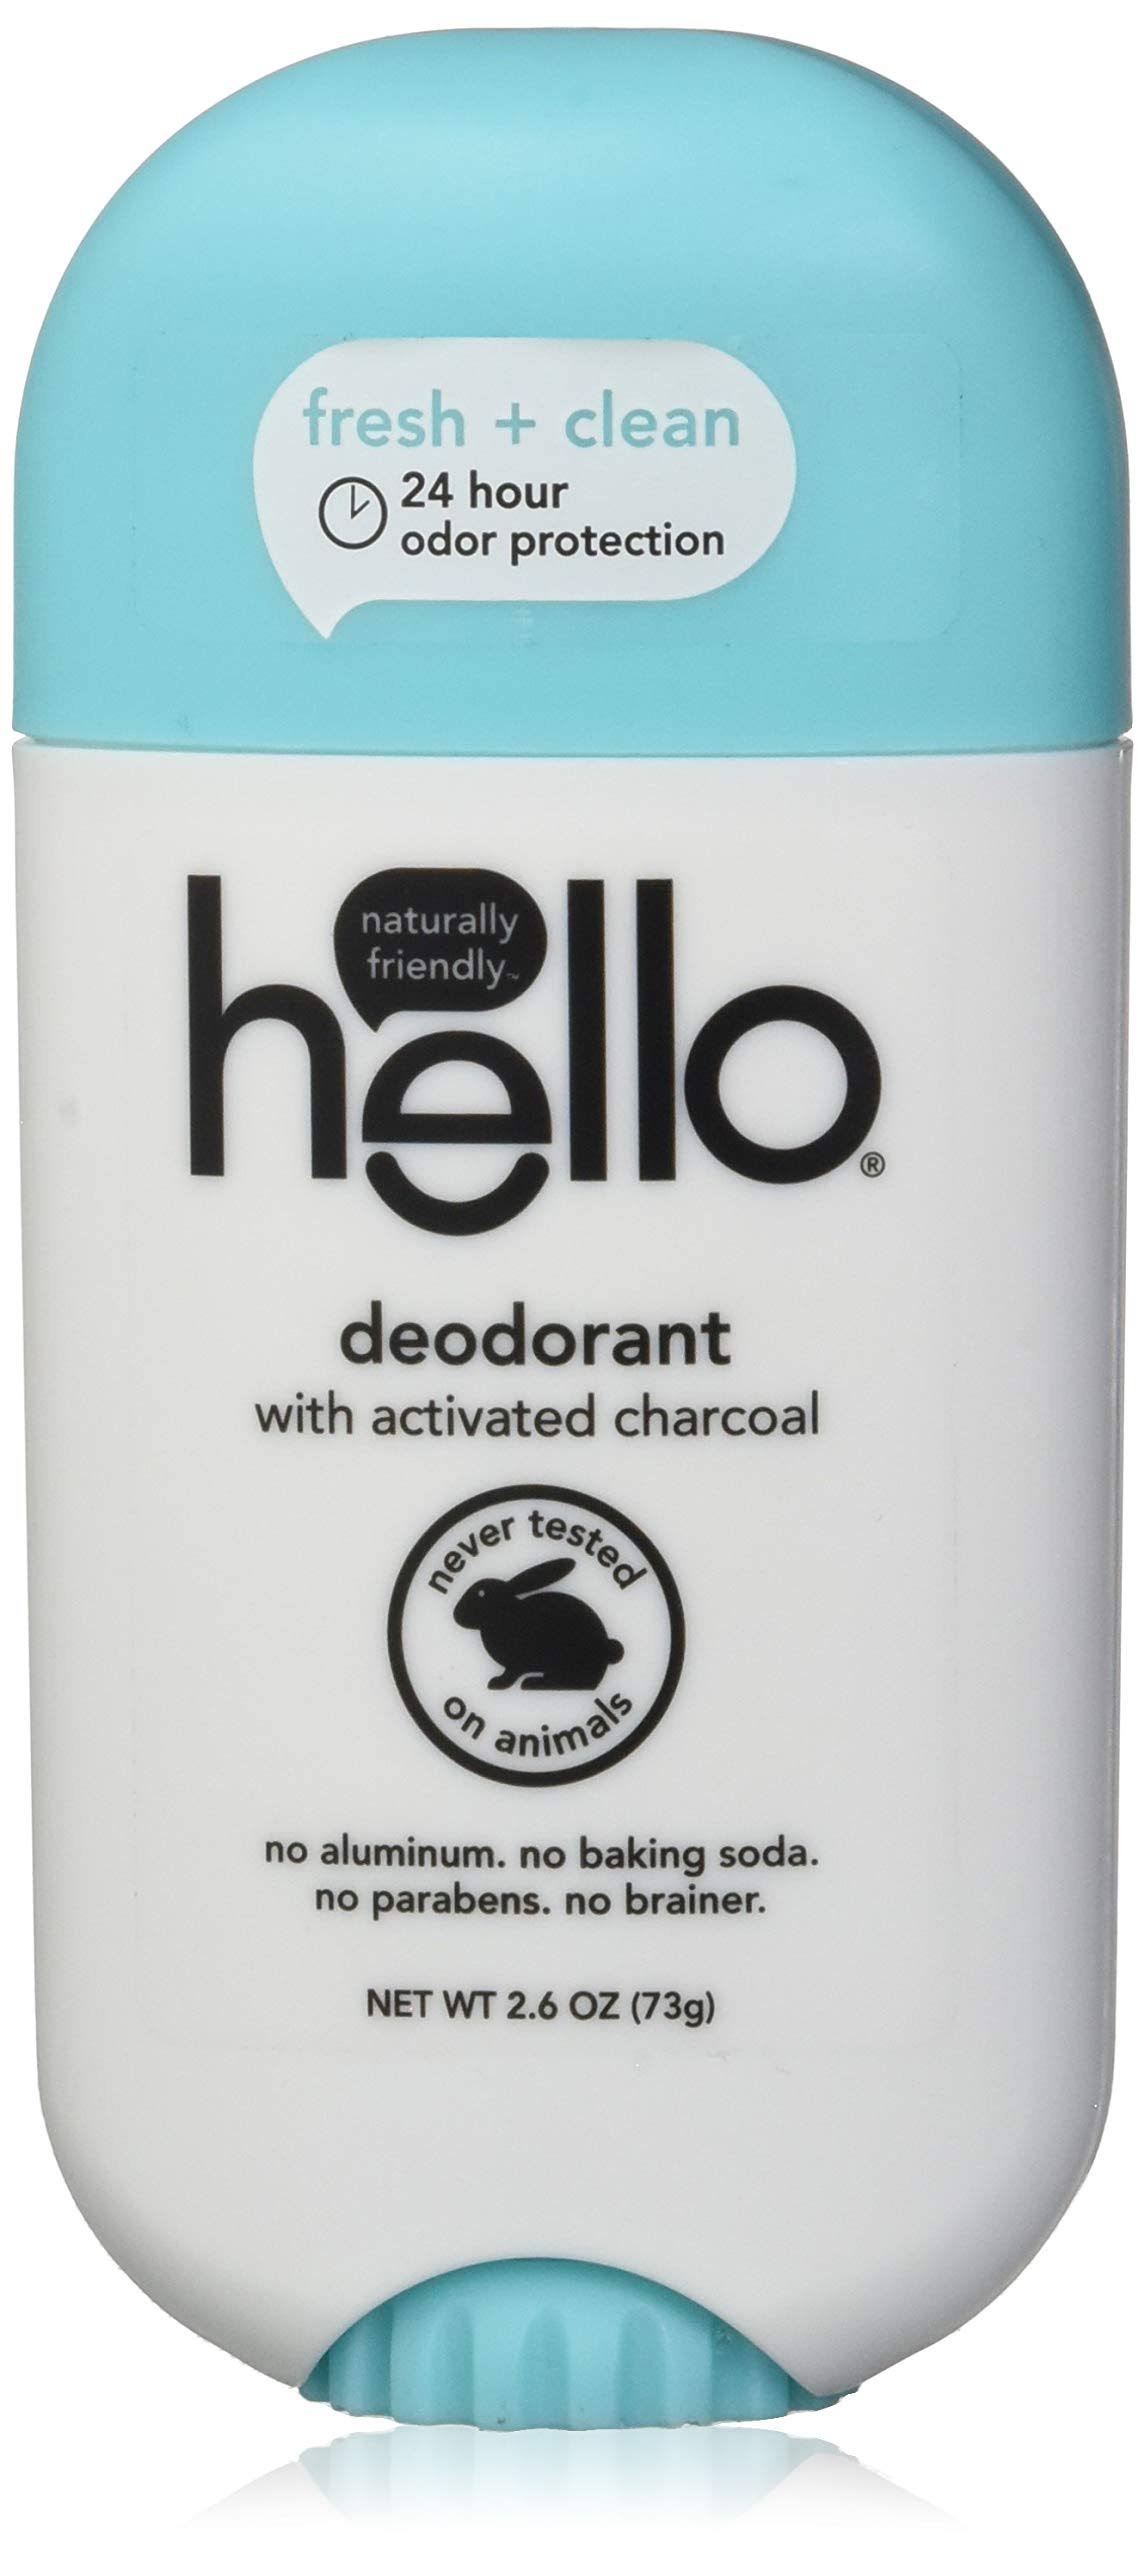 Hello Deodorant, with Activated Charcoal, Clean + Fresh - 2.6 oz